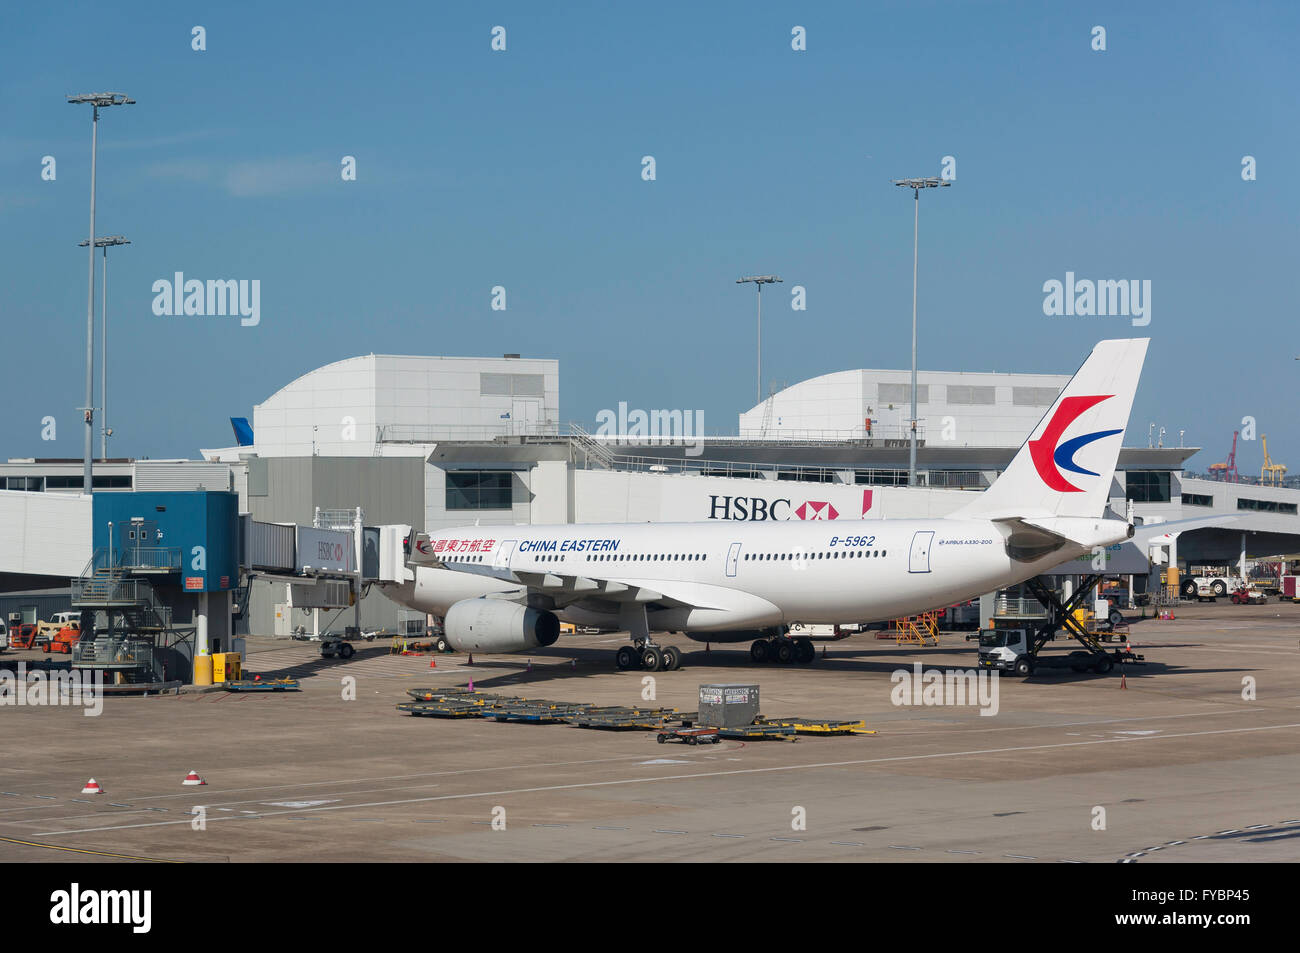 China Eastern Airlines Airbus A330-200 aircraft at Sydney Kingsford Smith Airport, Mascot, Sydney, New South Wales, Australia Stock Photo